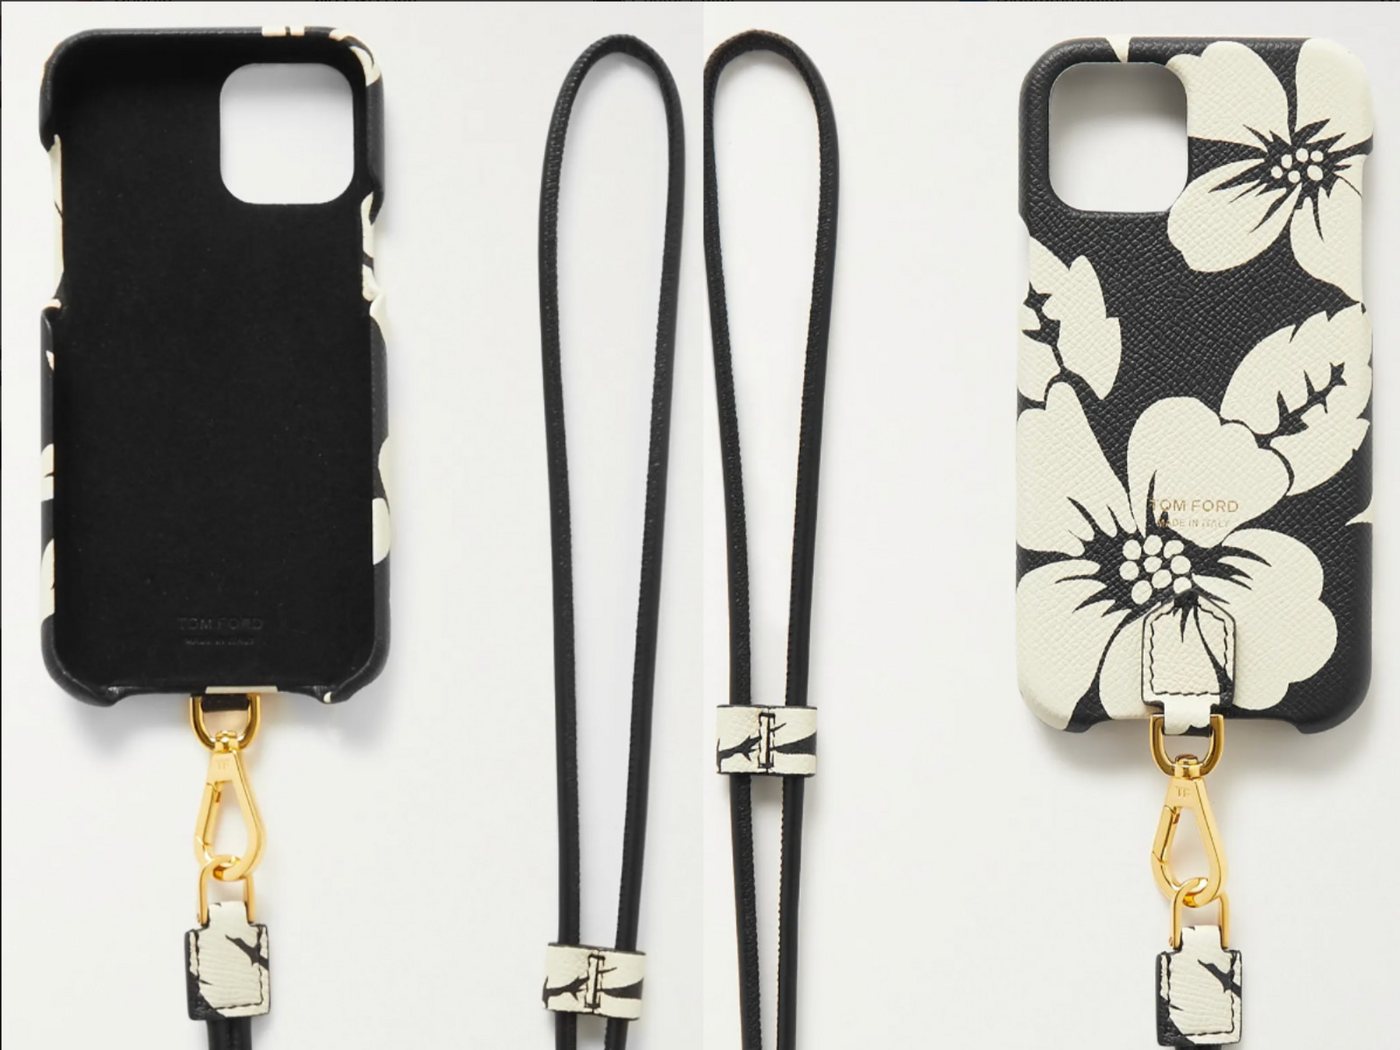 Tom Ford Handyhülle TOM FORD Floral Full-Grain Leather iPhone 11 Pro Case Lanyard Handy Ta von Tom Ford